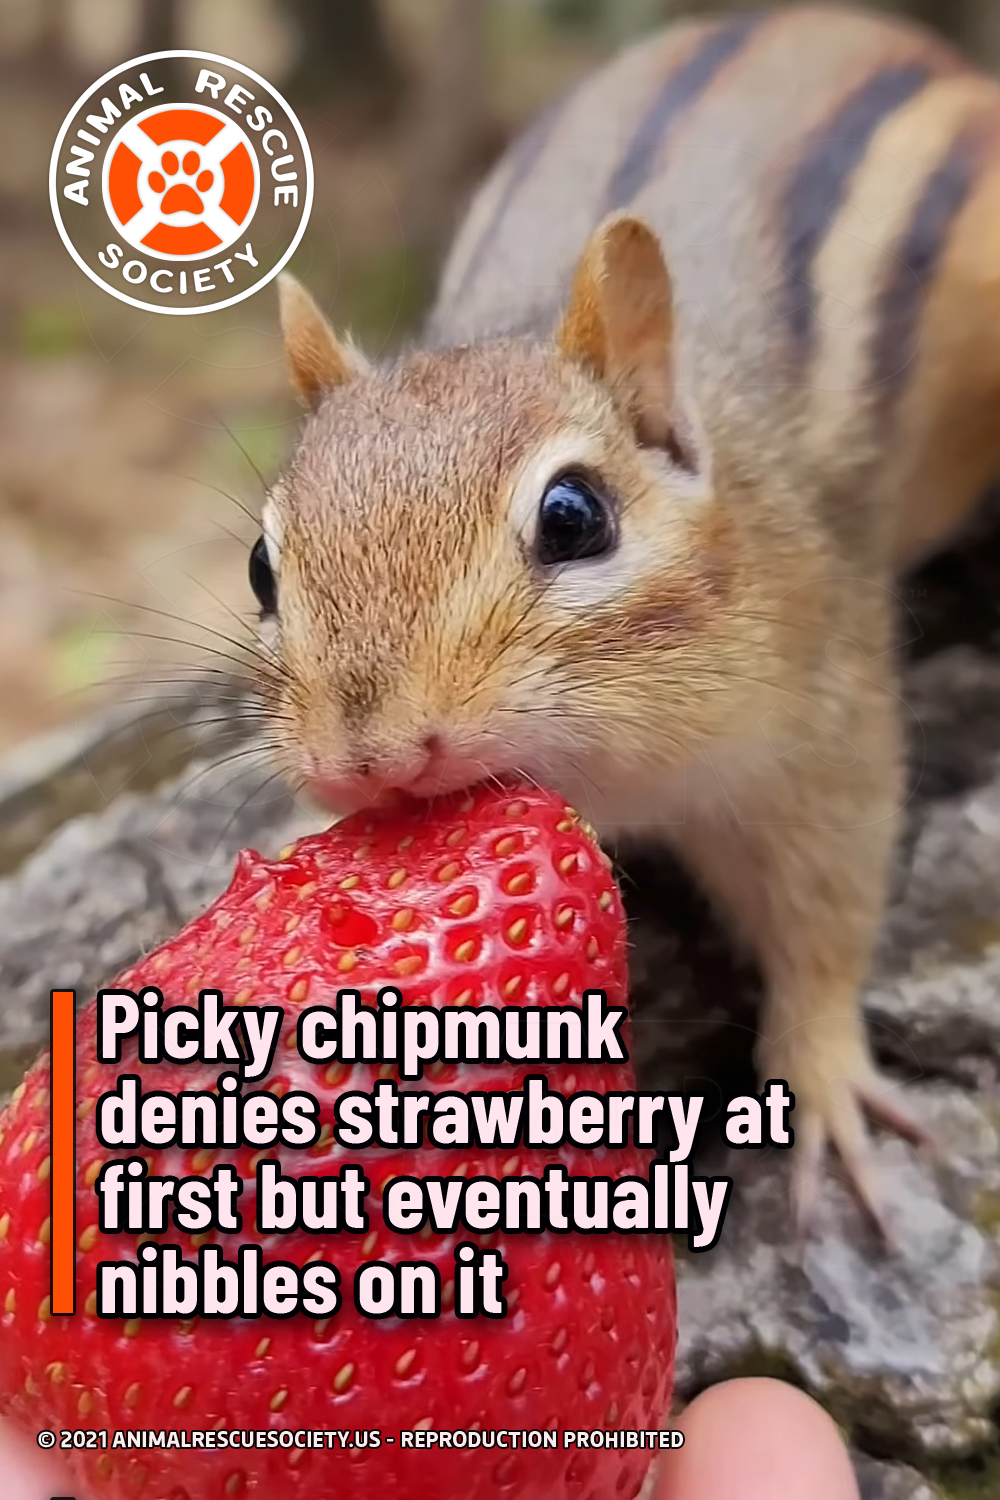 Picky chipmunk denies strawberry at first but eventually nibbles on it